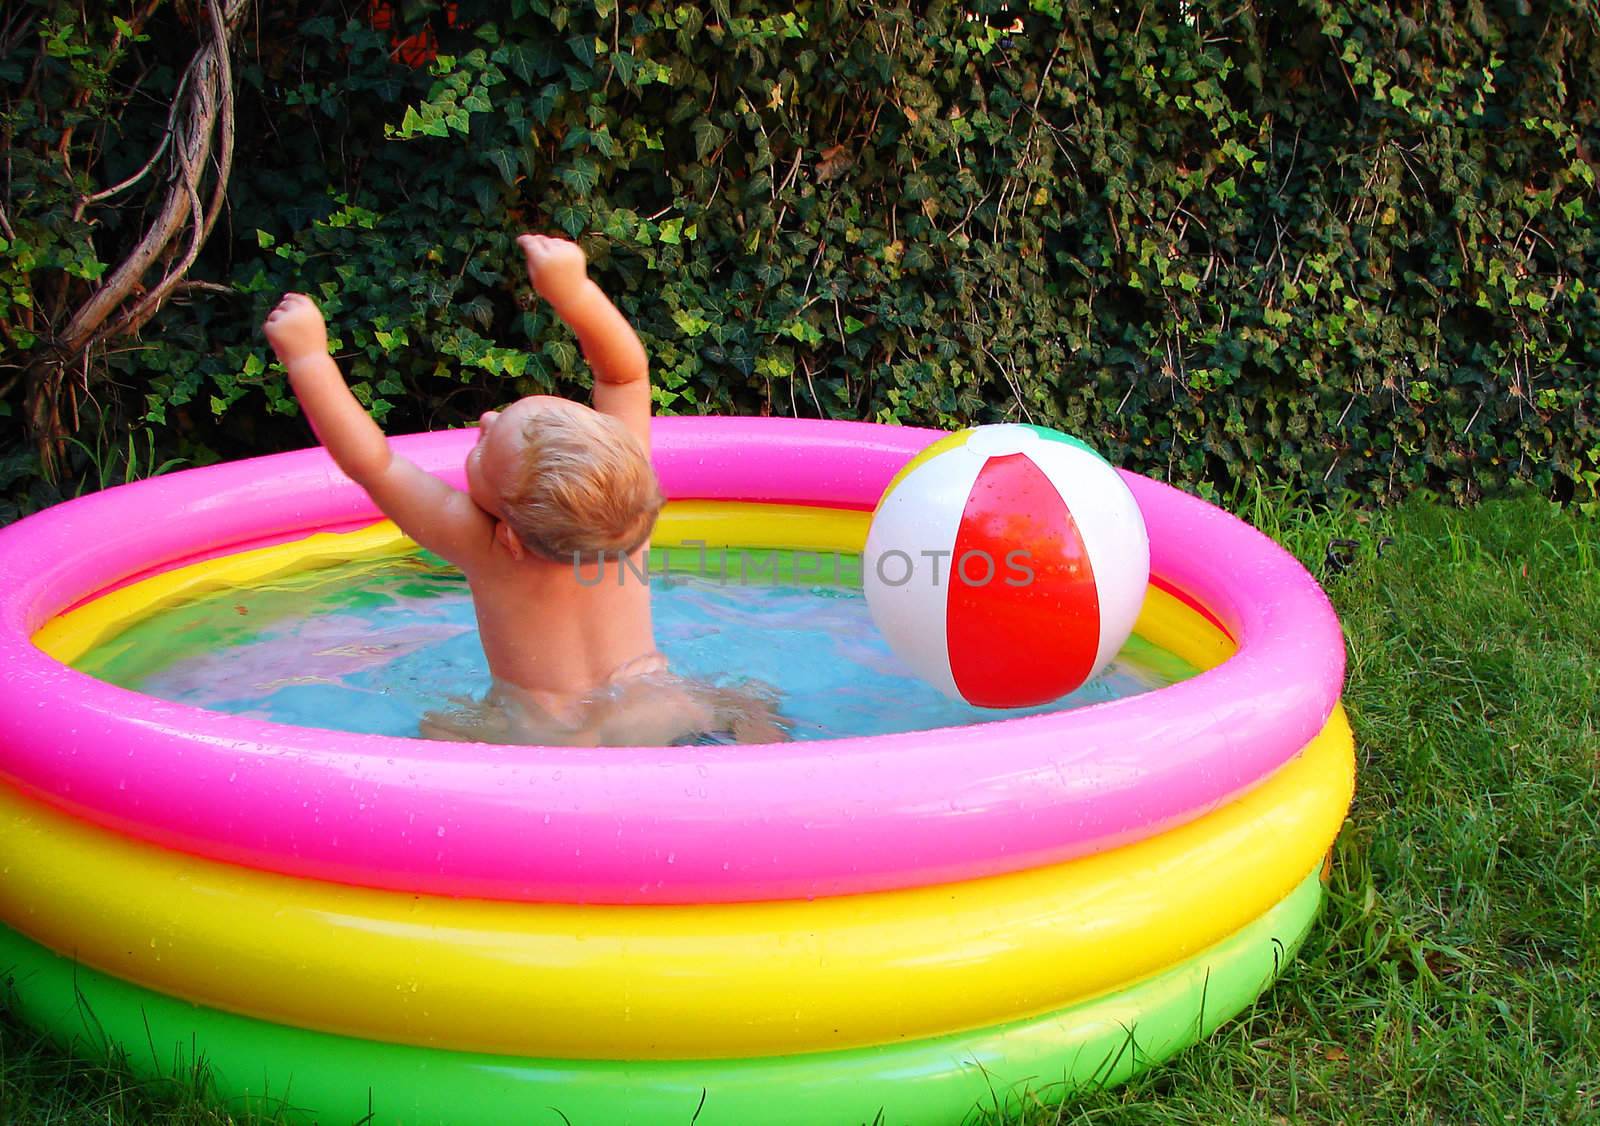 The kid in an inflatable pool by NickNick